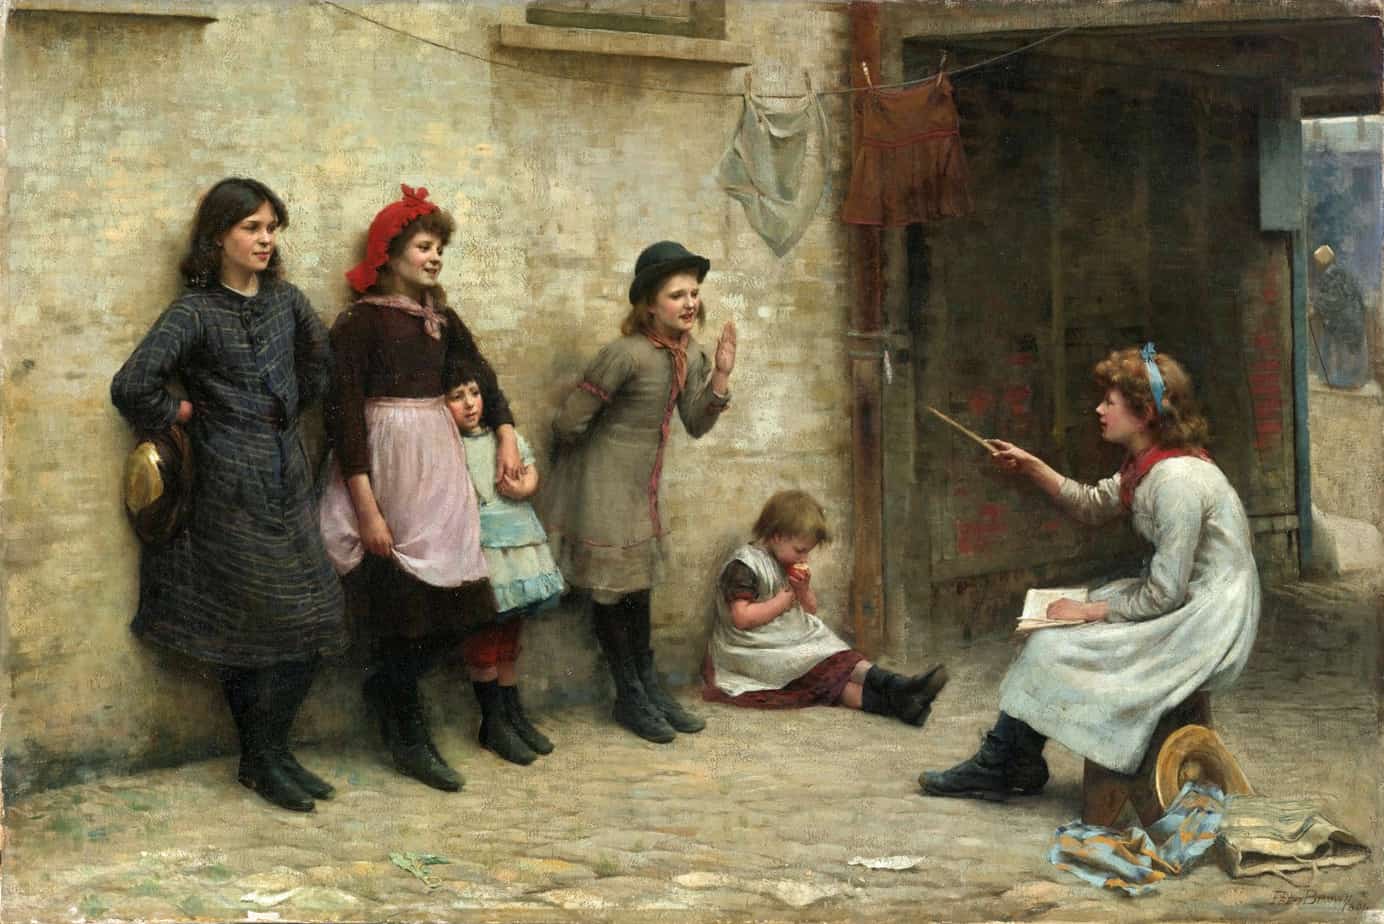 Frederick Brown - Candidates for Girton 1884 play